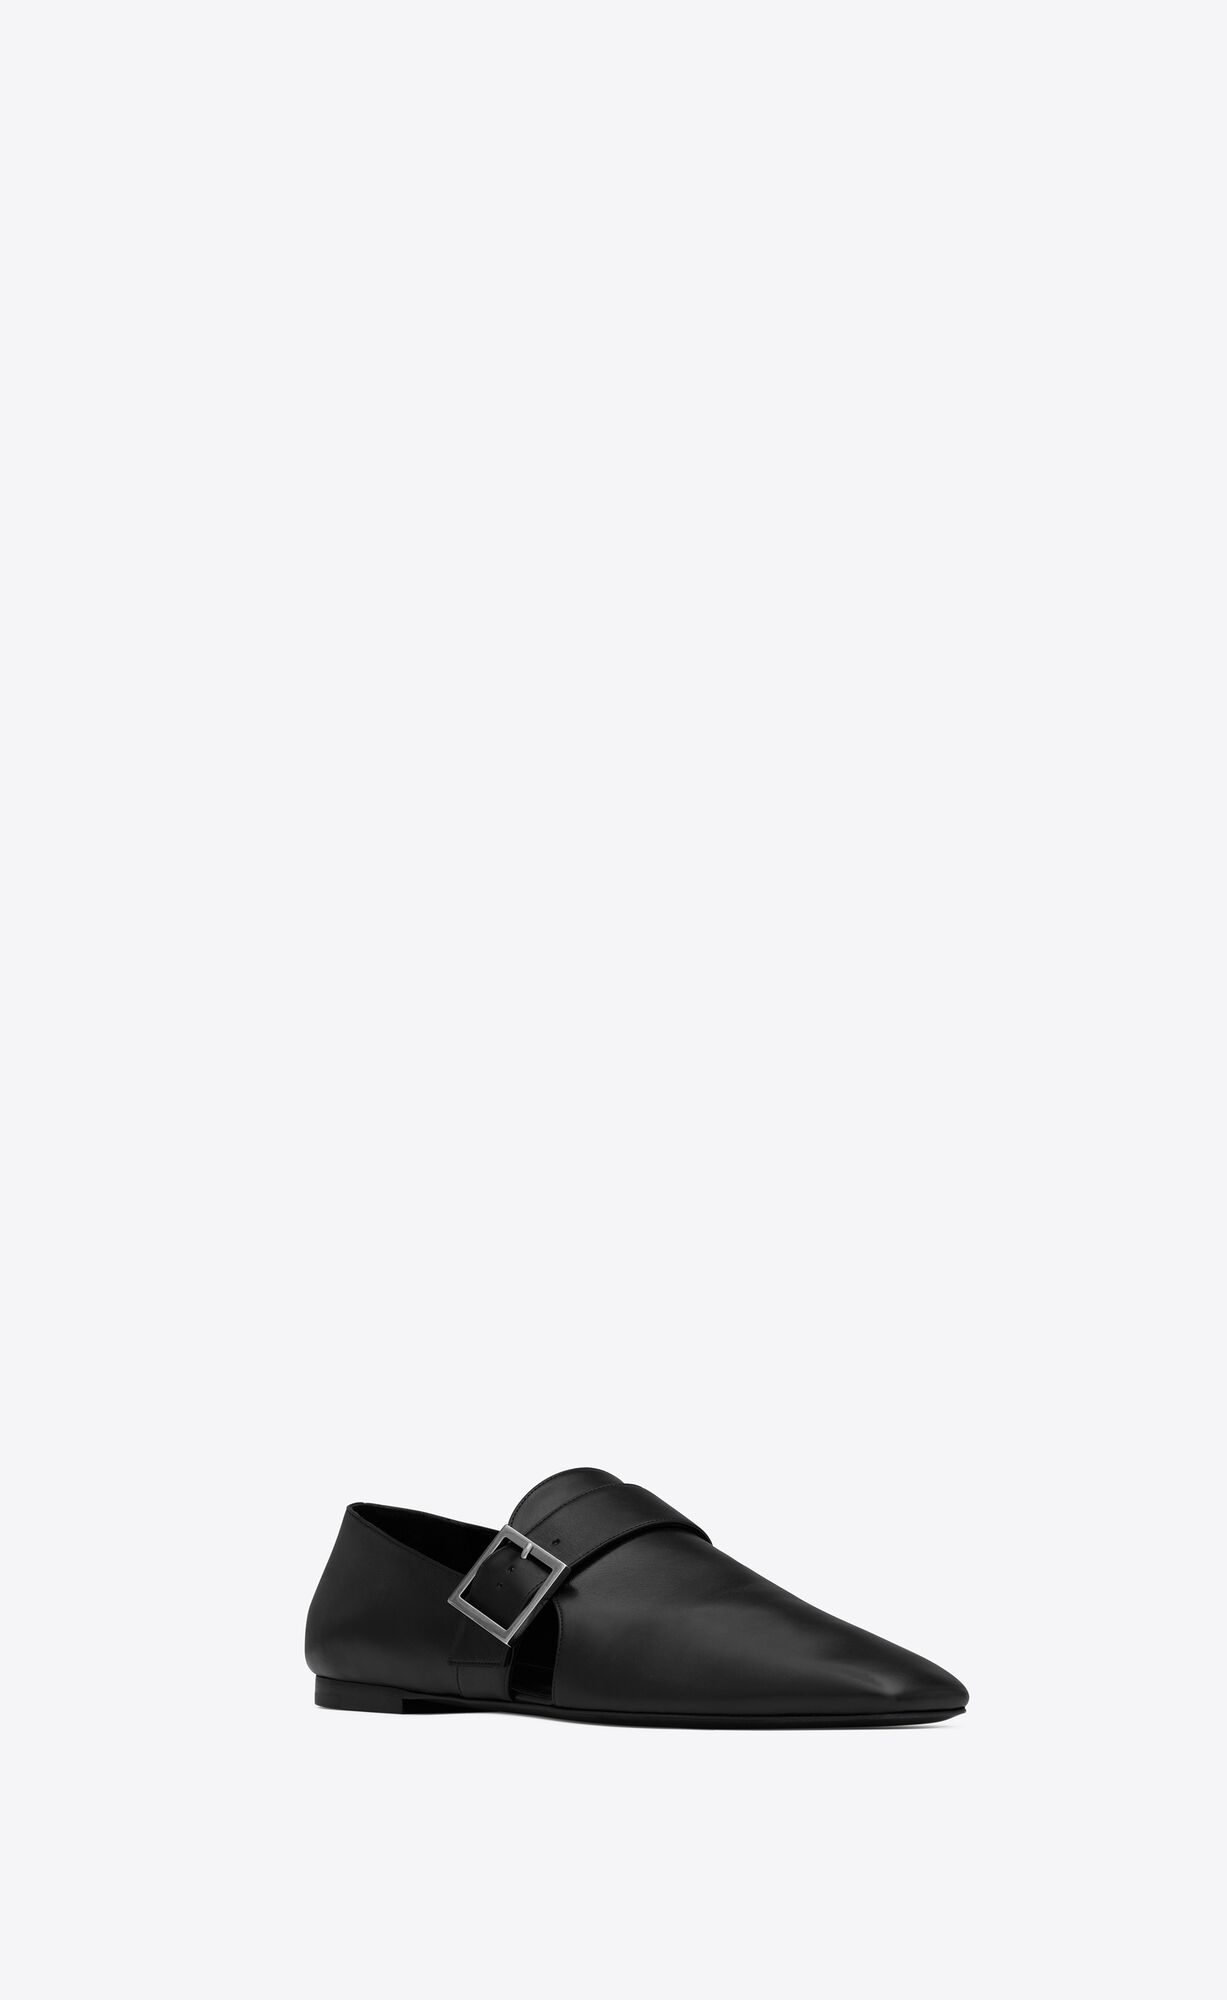 TRISTAN slippers in smooth leather | Saint Laurent | YSL.com